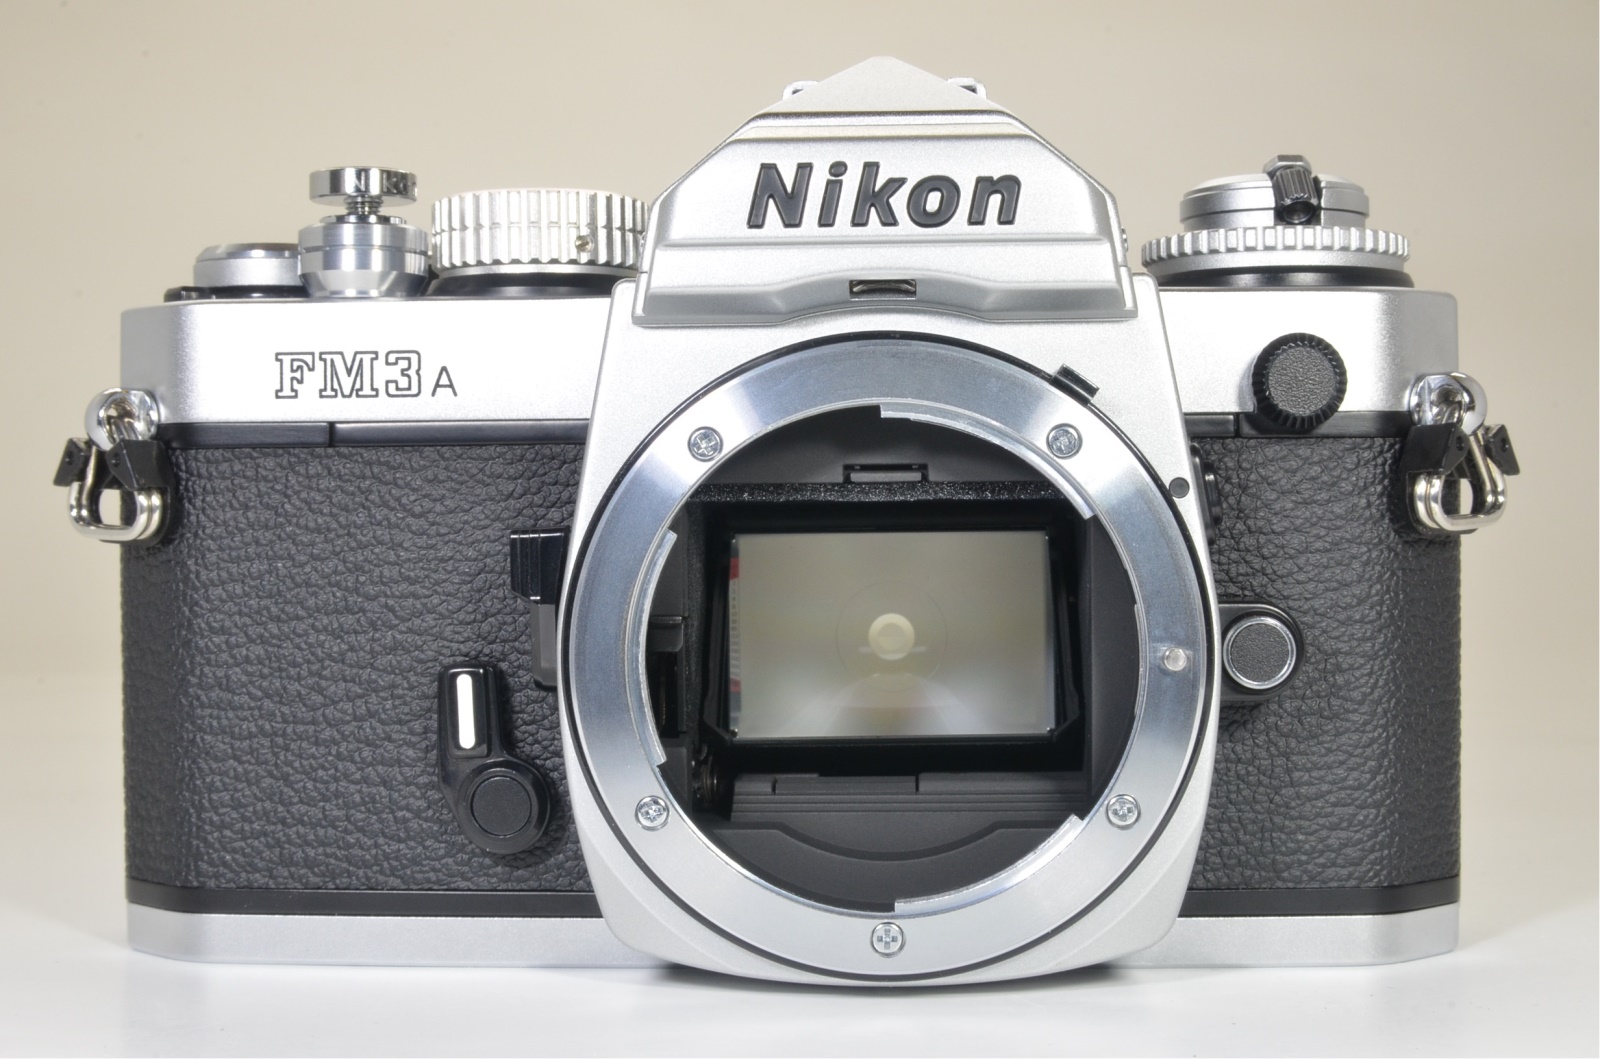 nikon fm3a silver 35mm film camera with nikkor 45mm f/2.8p film tested